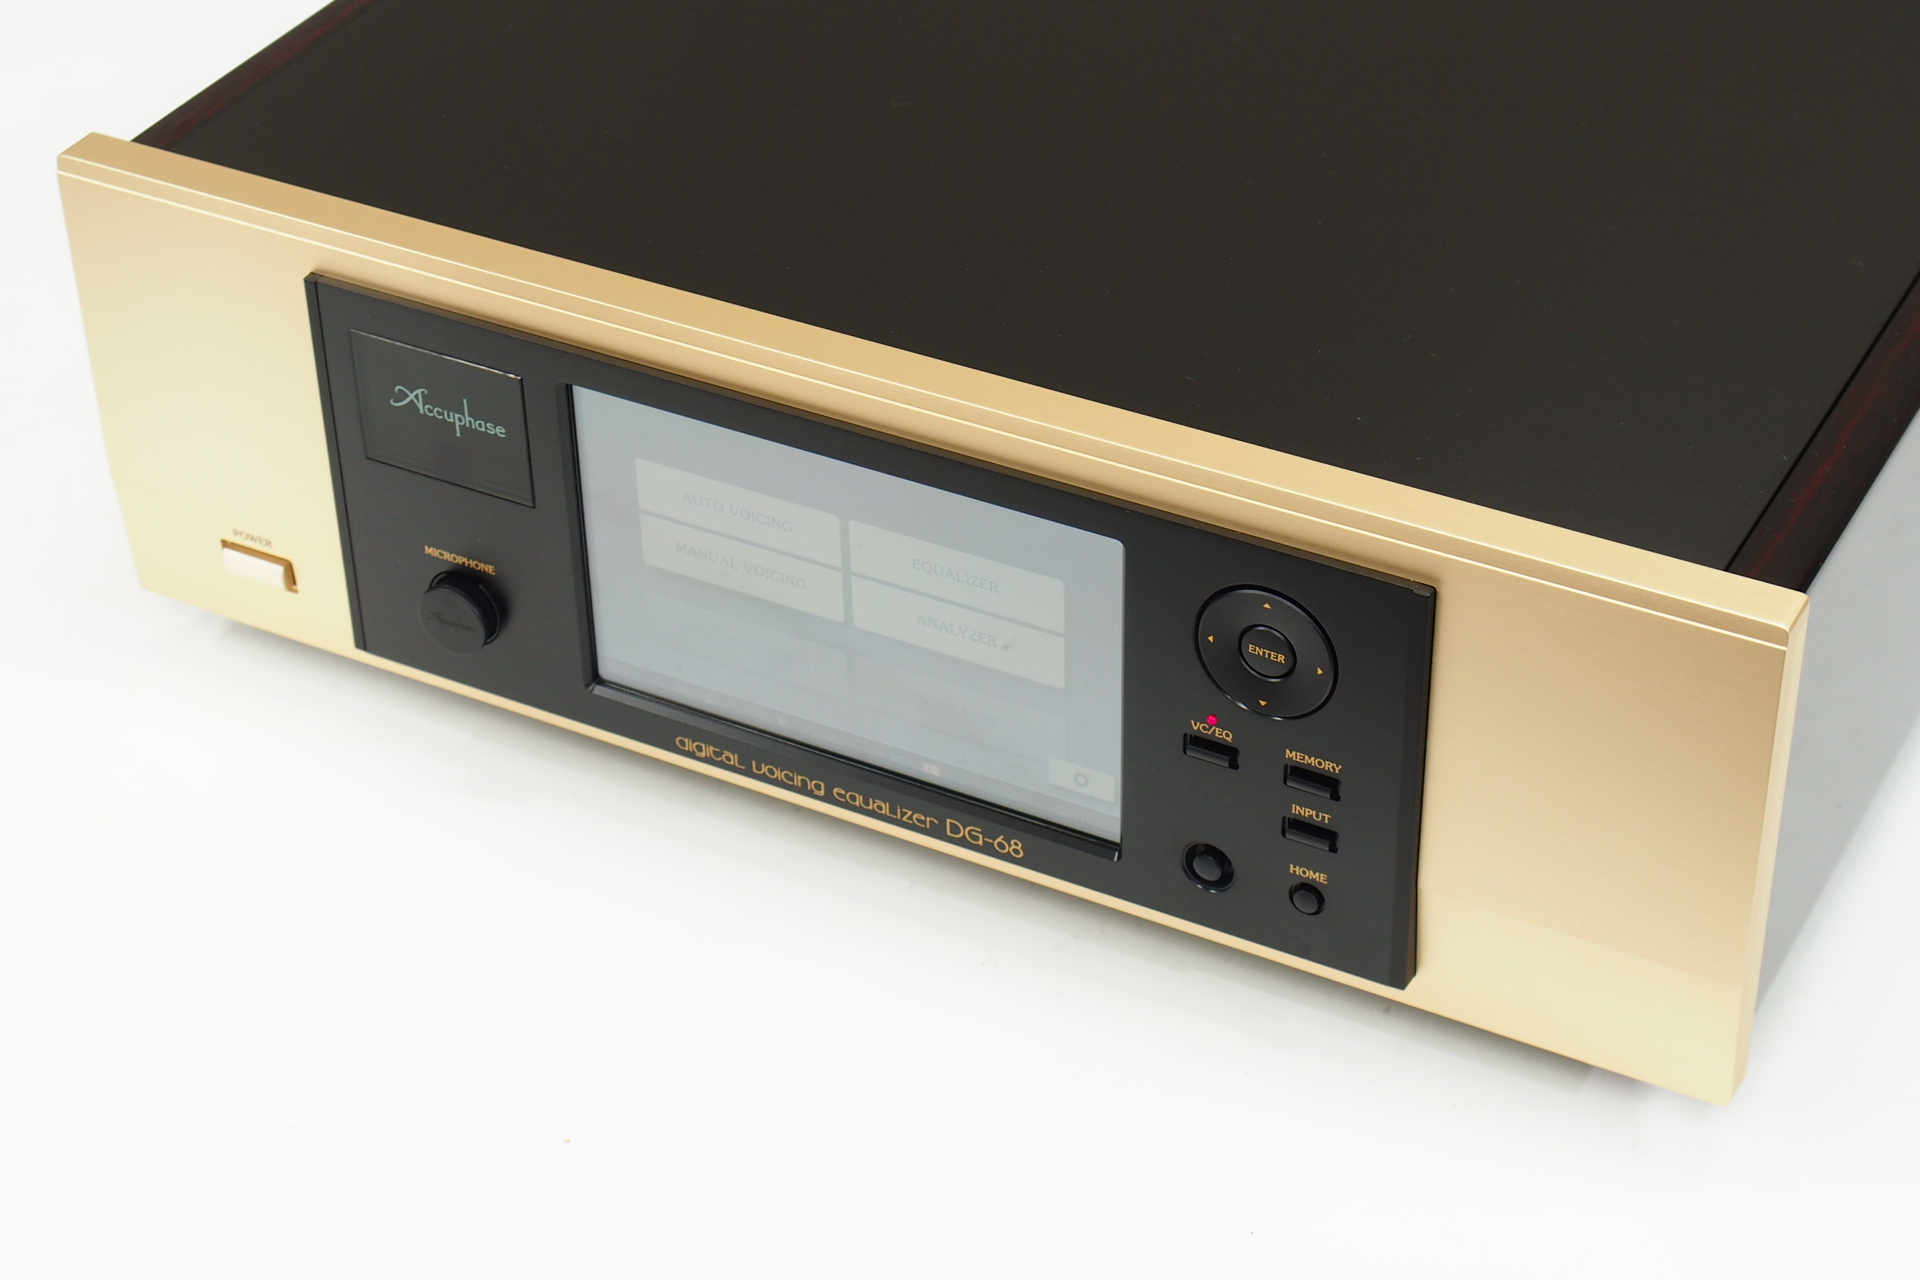 Accuphase DG-68 アキュフェーズ デジタル ヴォイシング イコライザー 